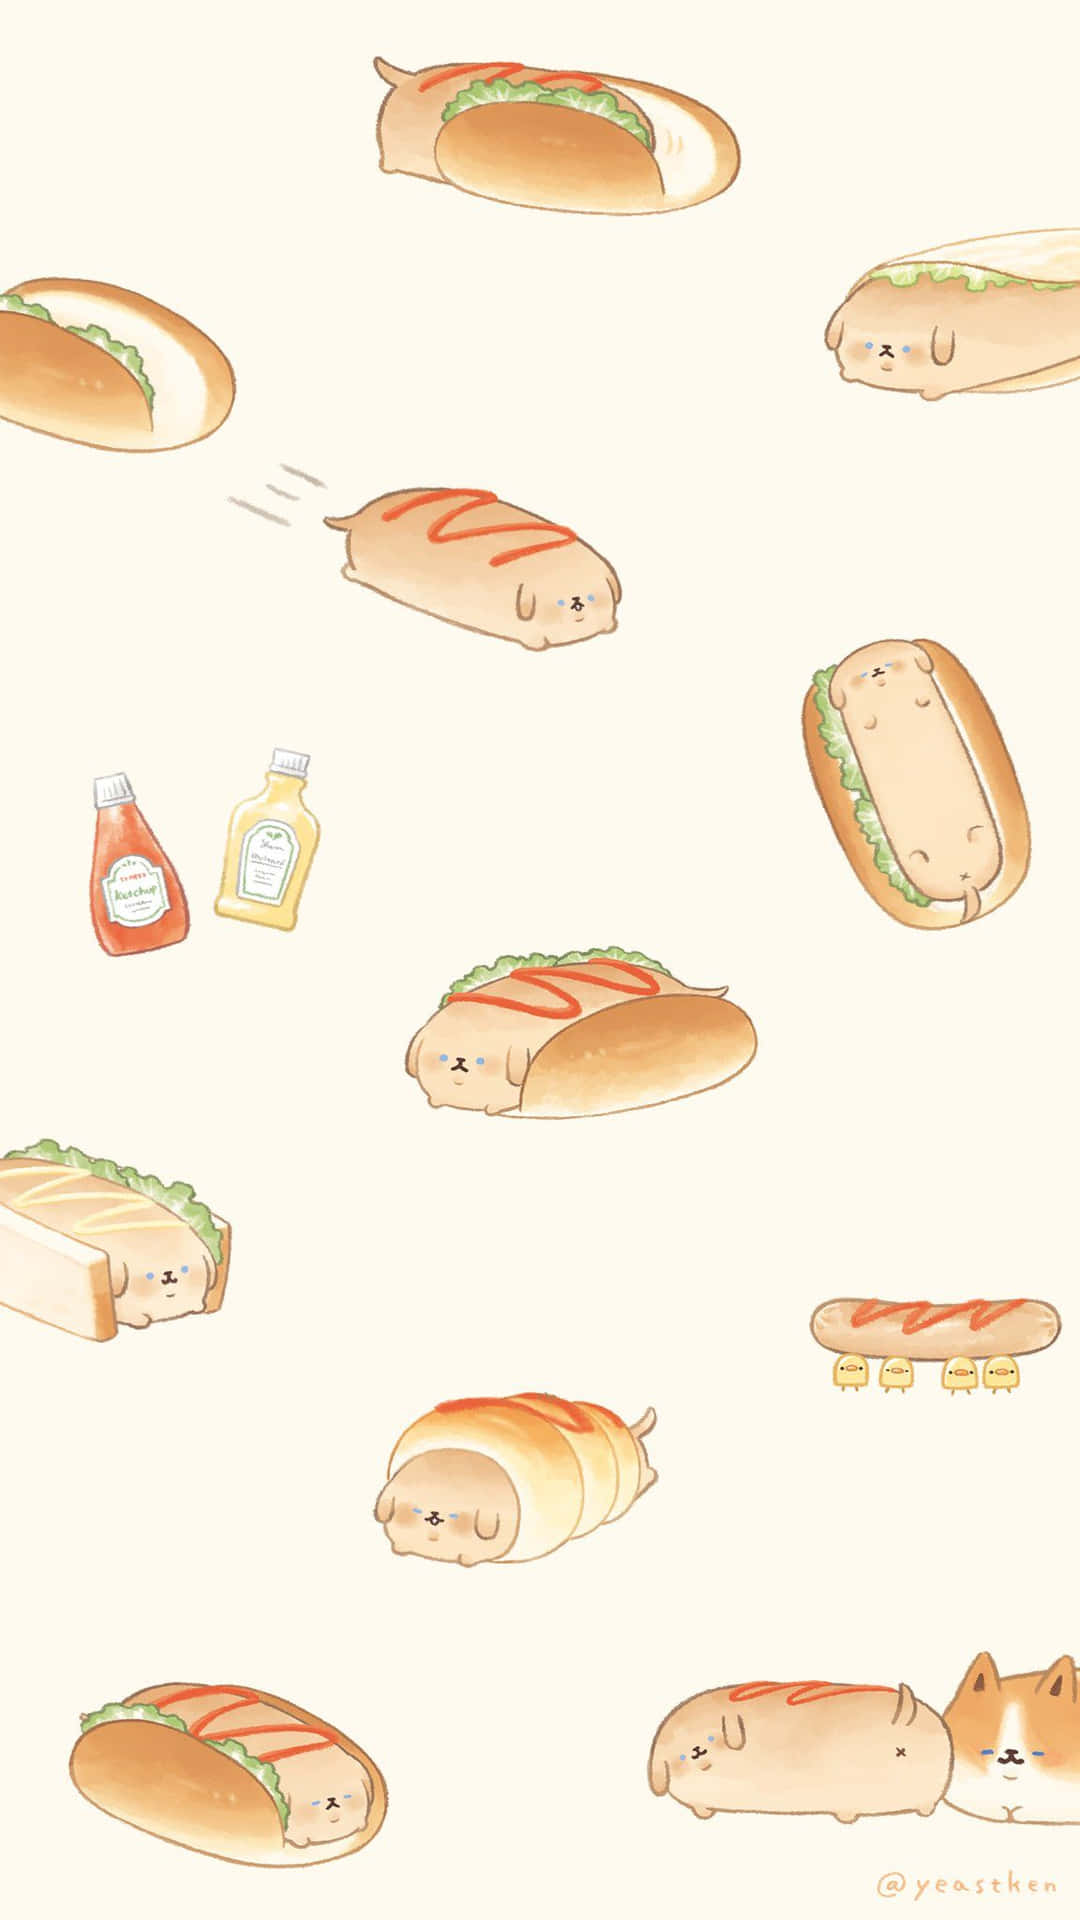 A Pattern Of Hot Dogs With Condiments On Them